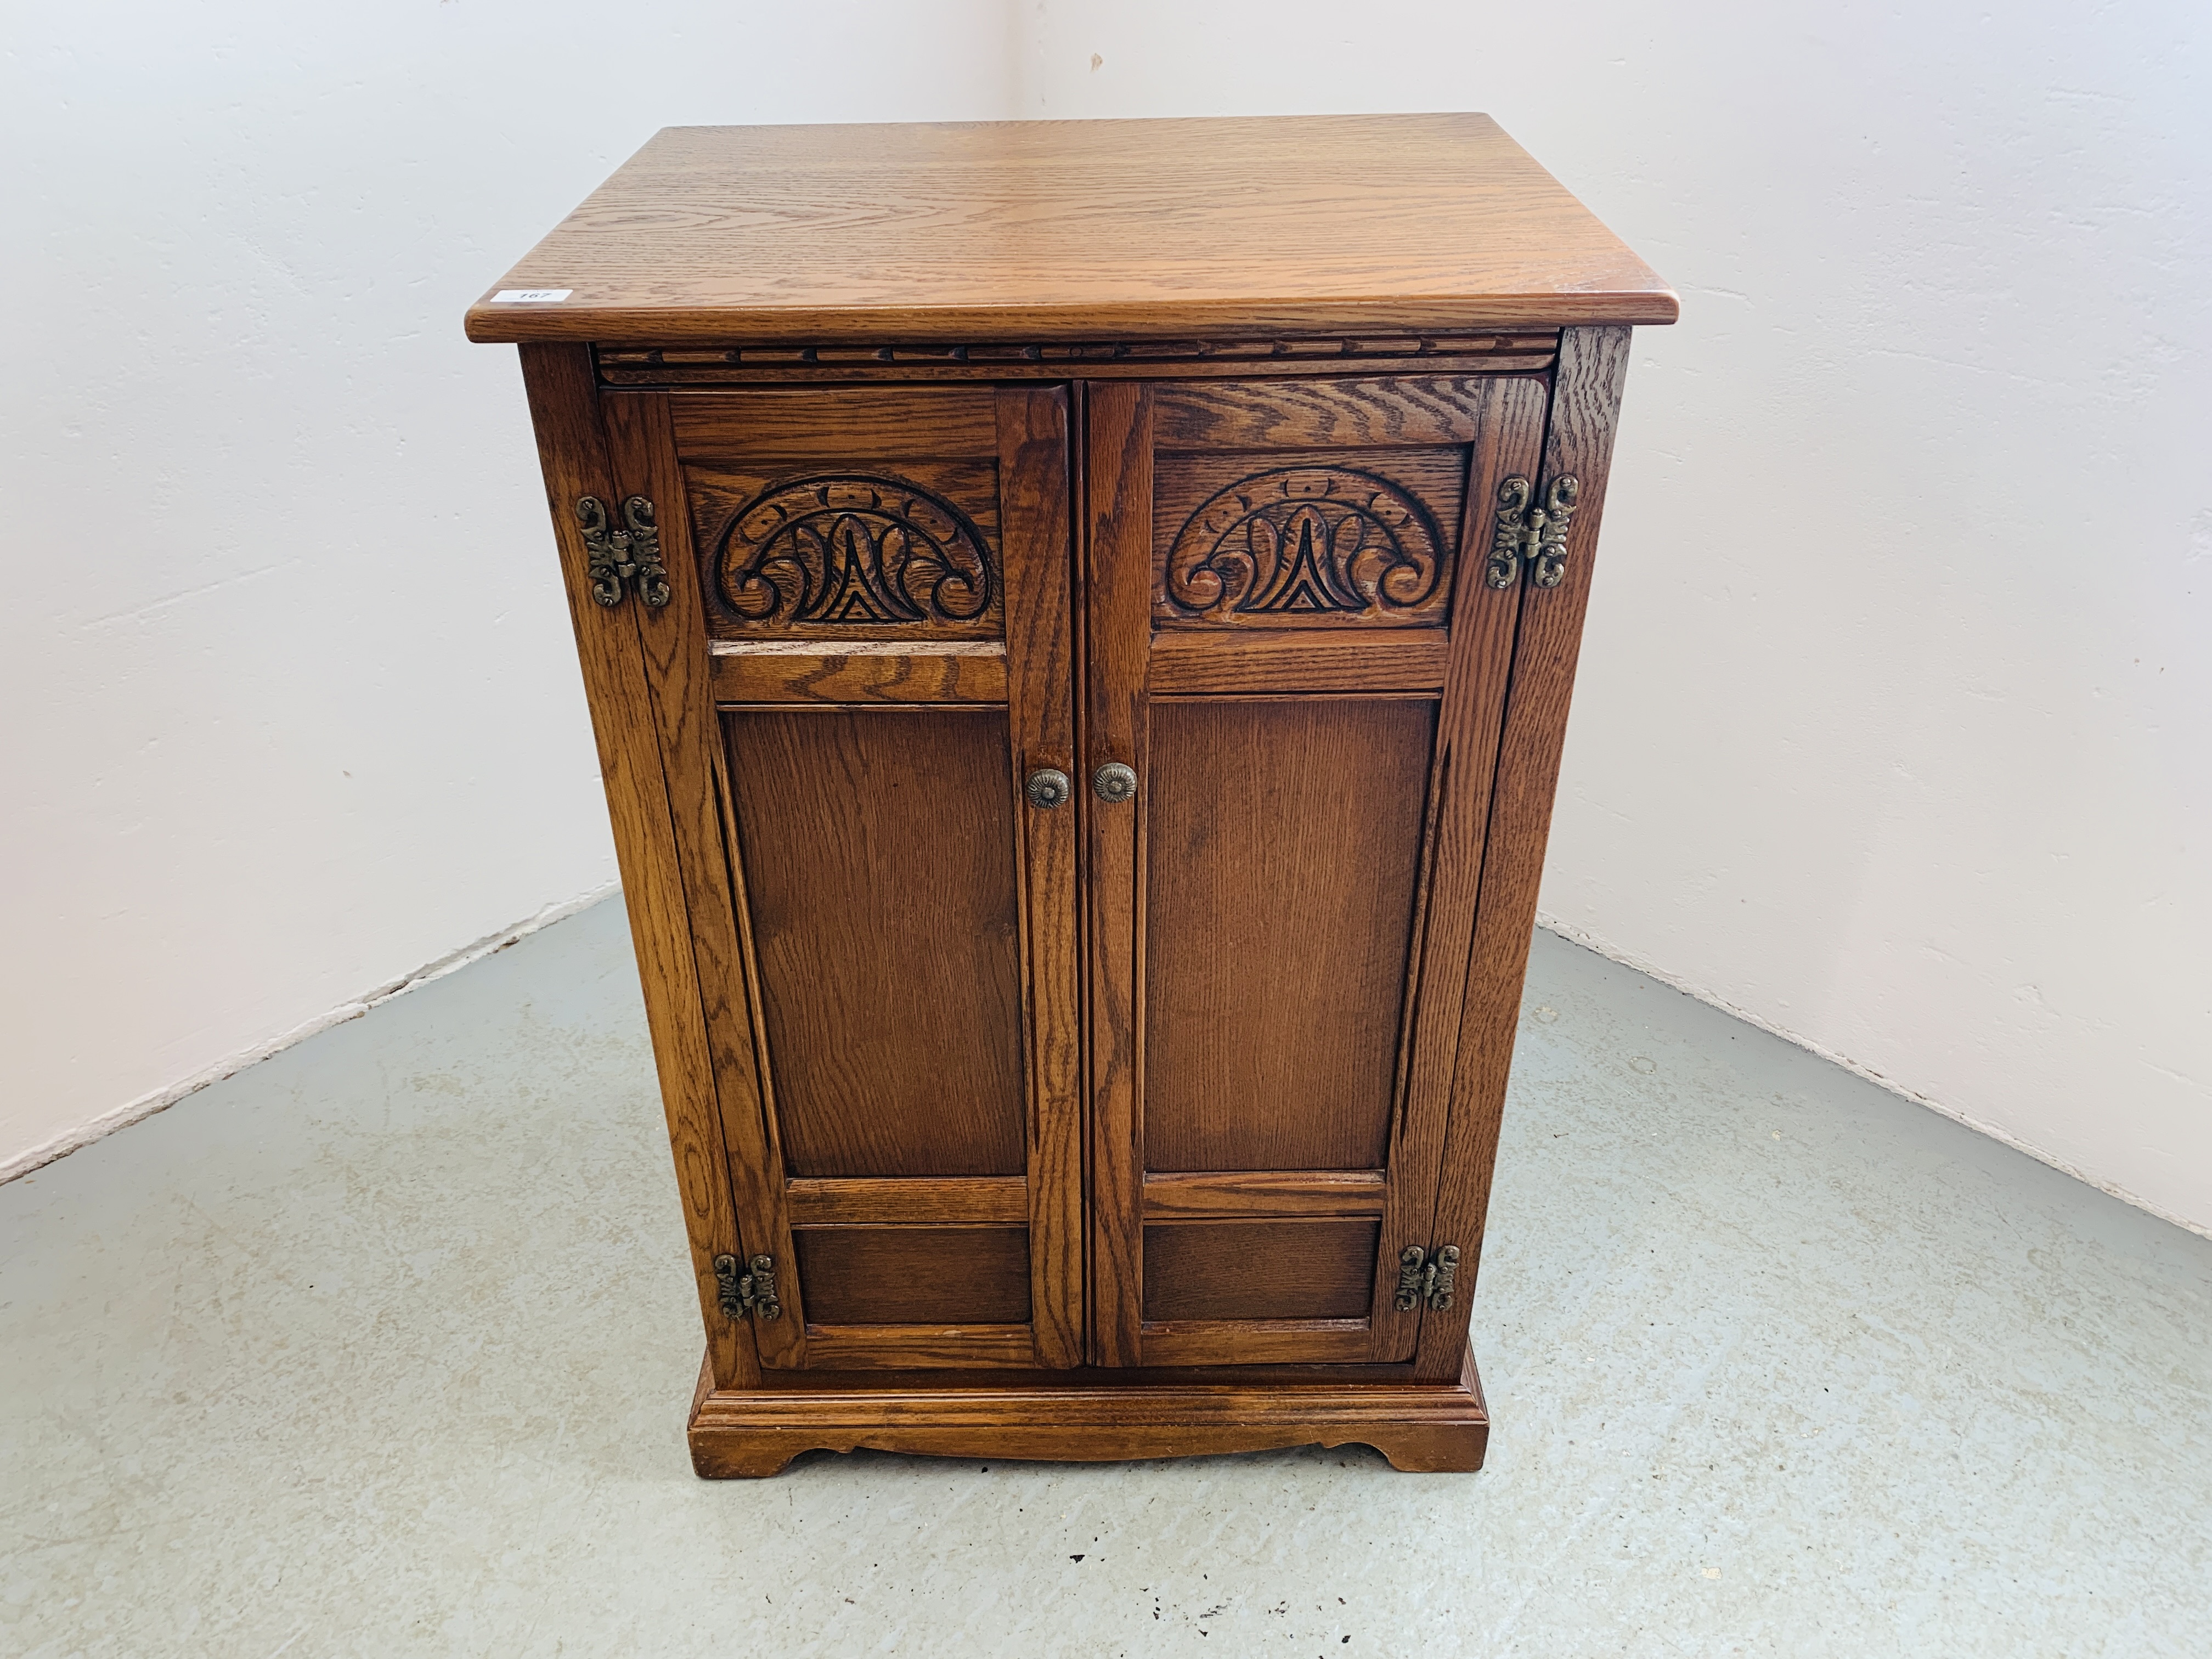 AN OLD CHARM STYLE TWO DOOR CABINET WITH SHELVED INTERIOR AND HINGED TOP - W 62CM. D 49CM. H 94CM.